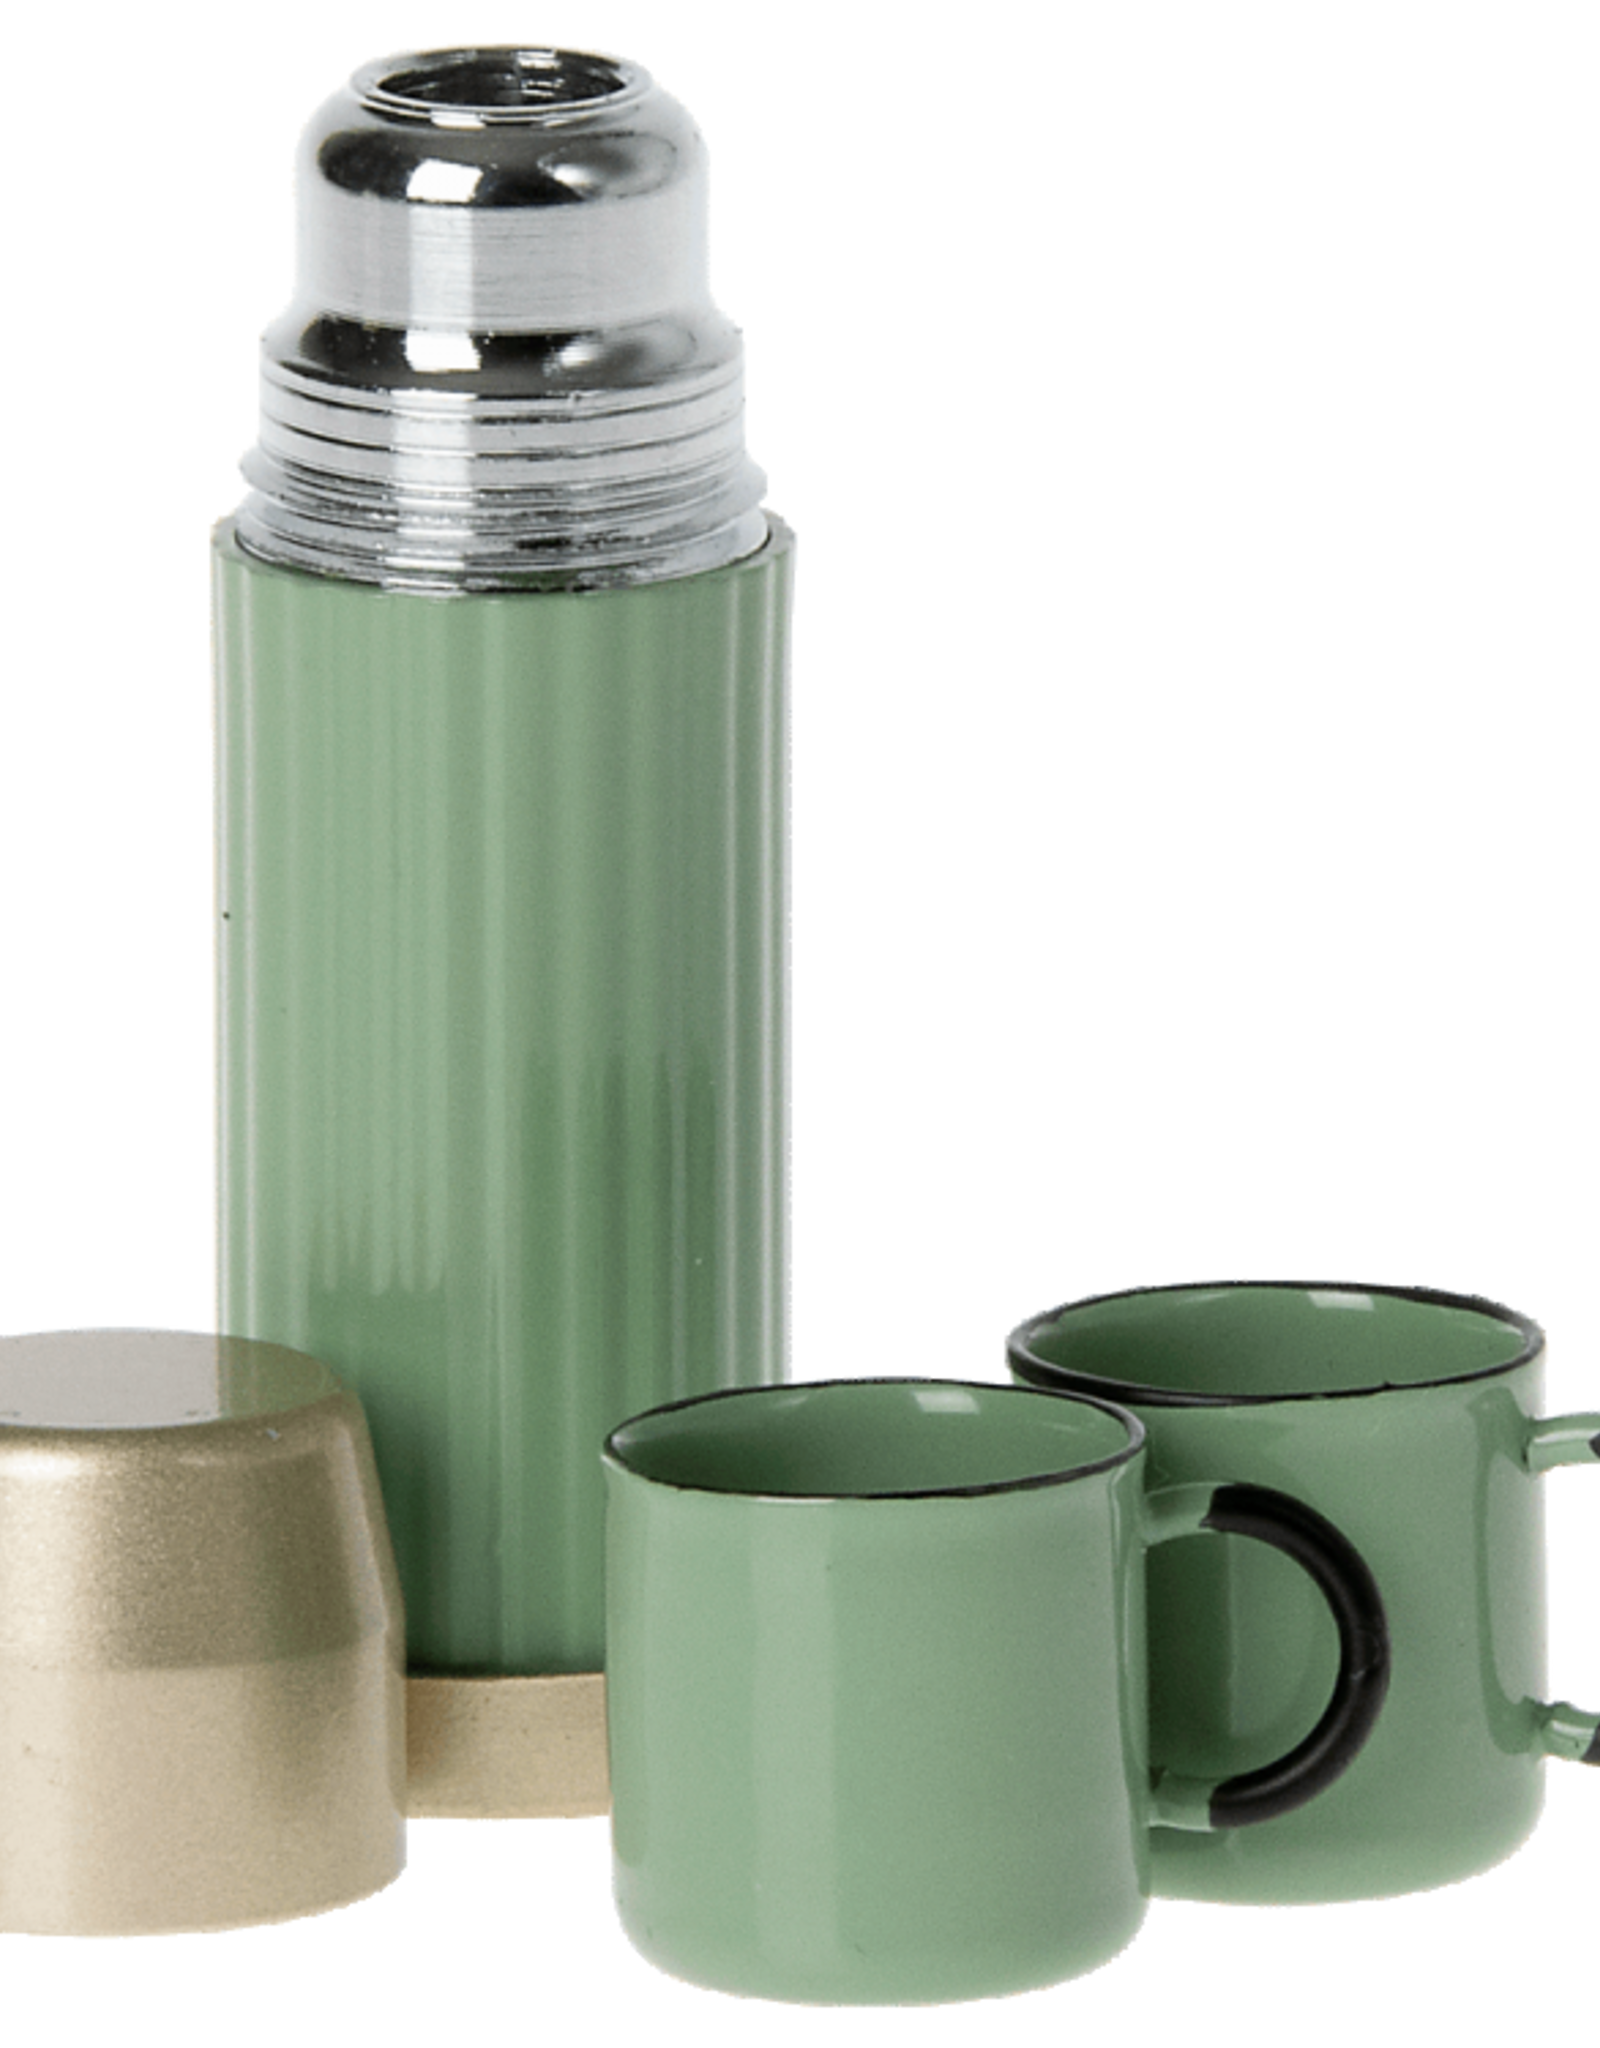 Maileg thermos and cups, mint